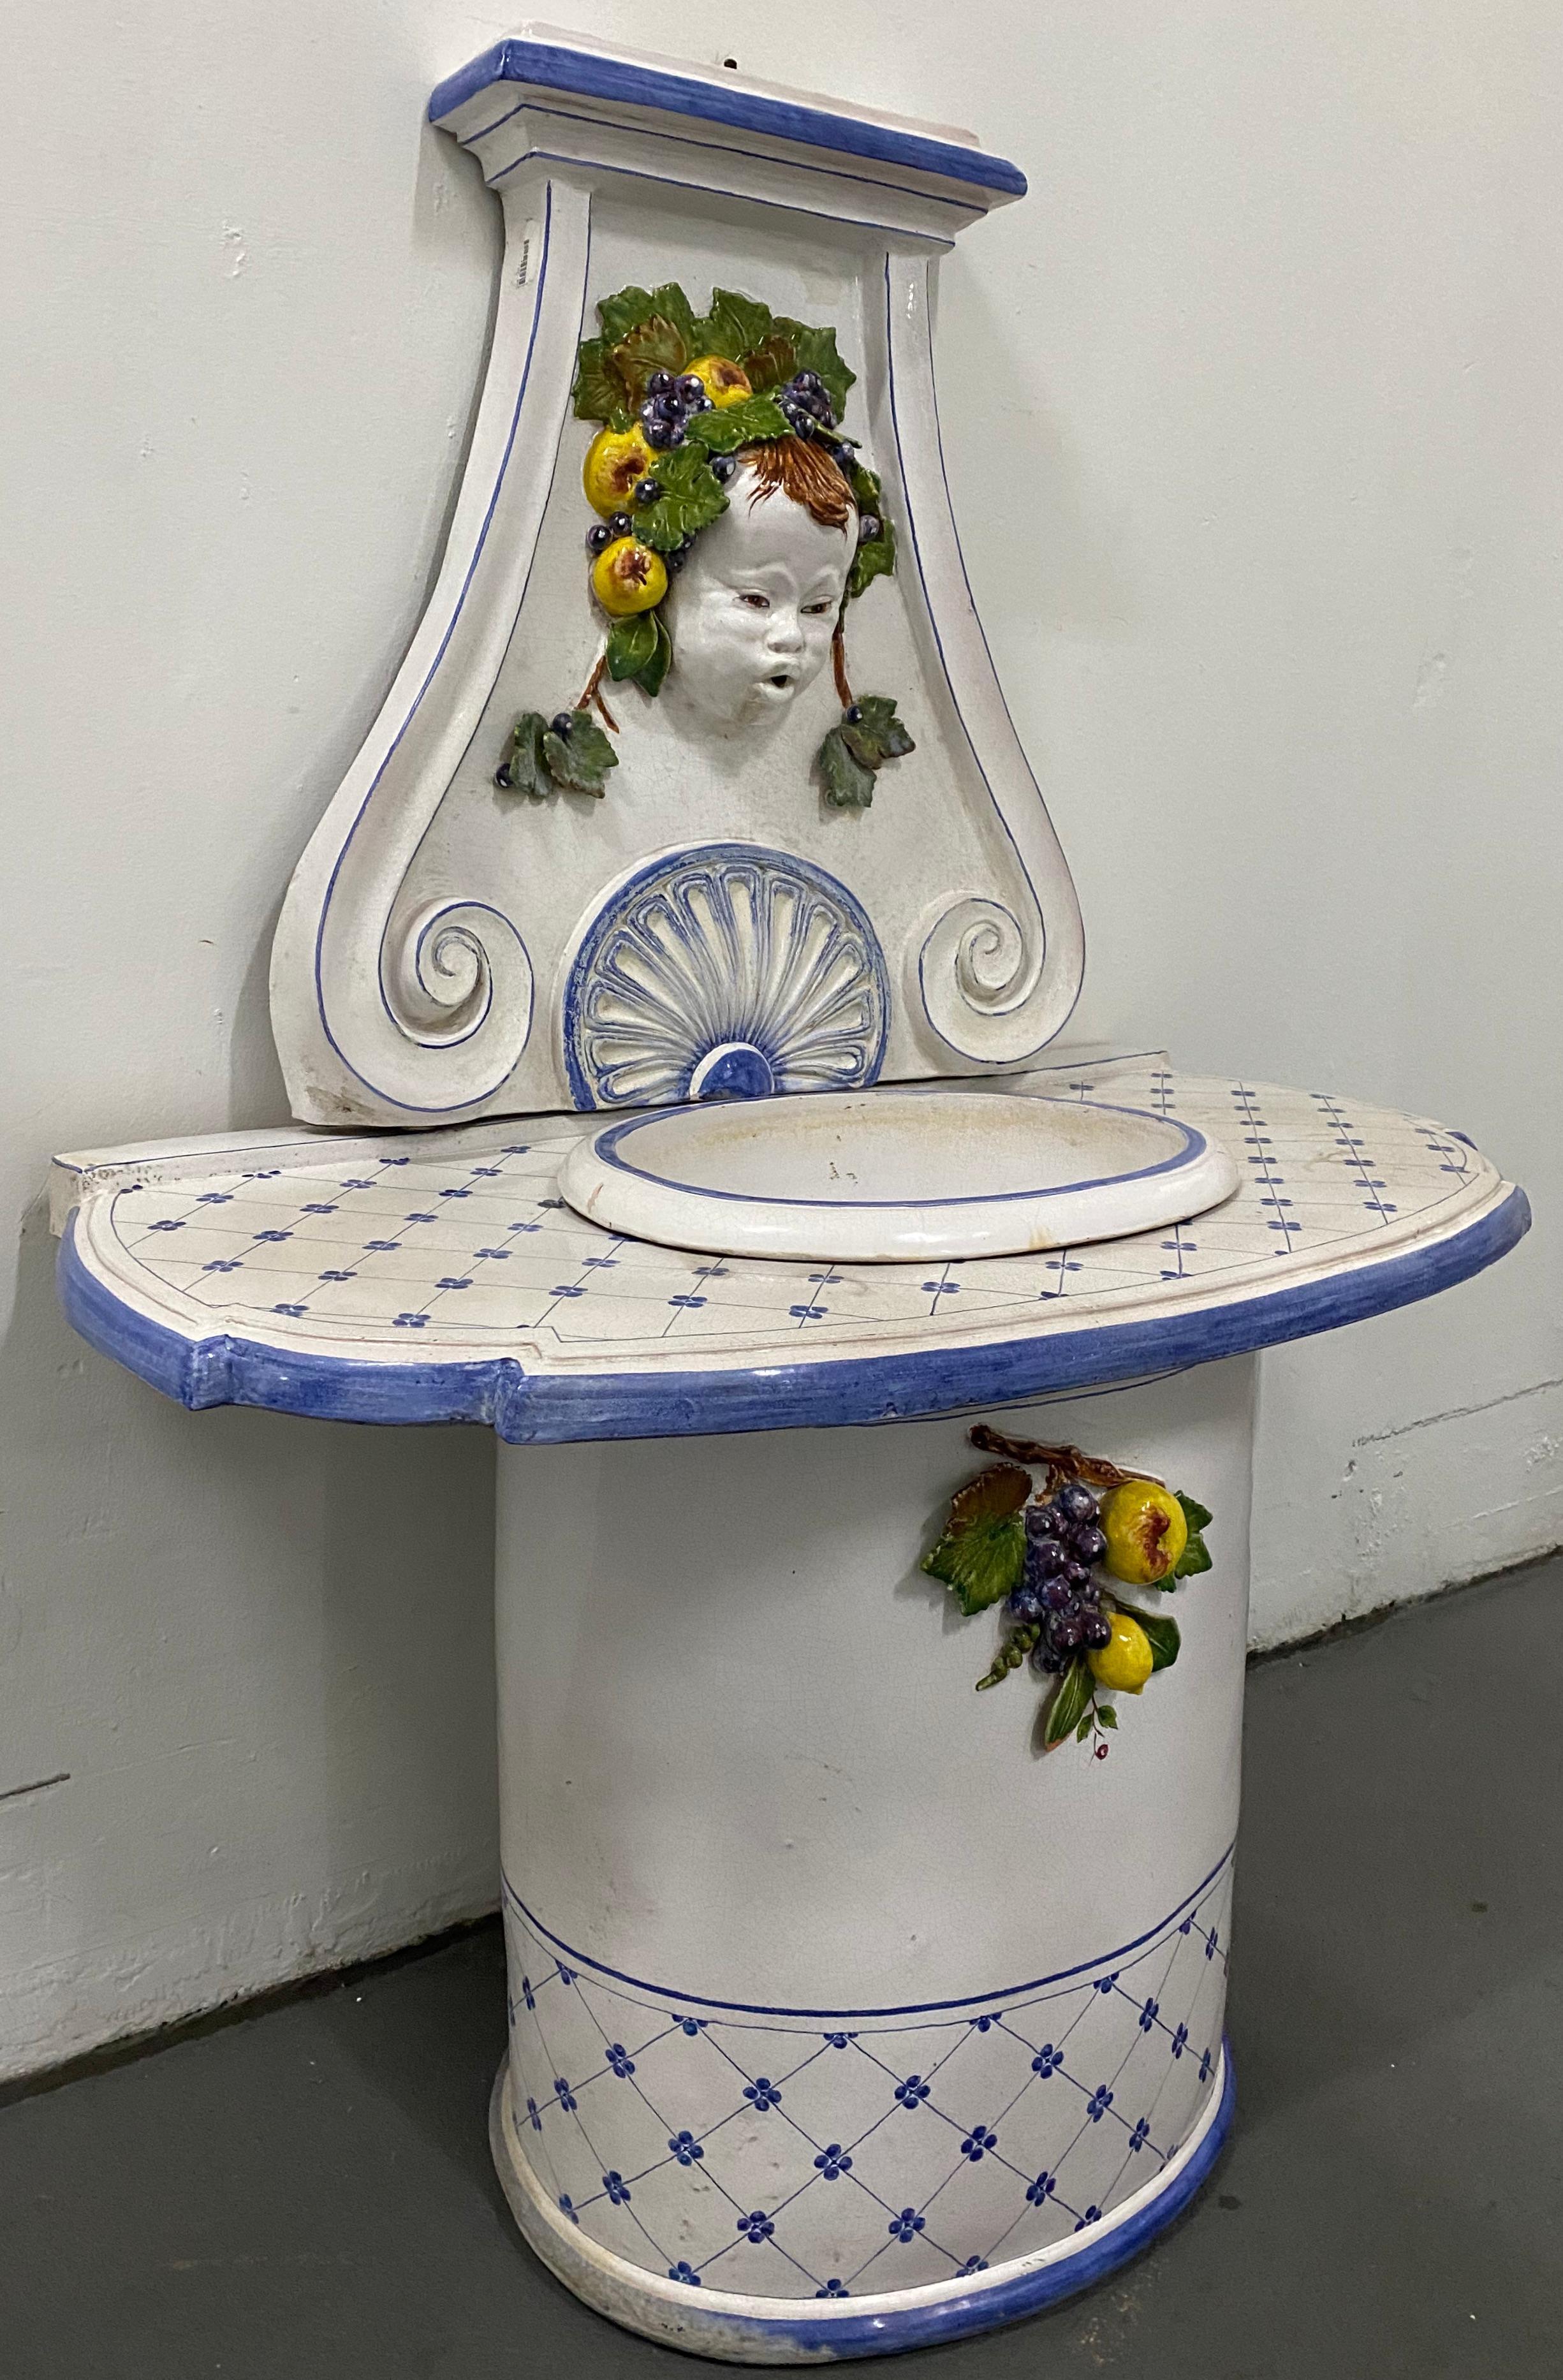 Mid-20th century painted and glazed Italian Garden Fountain, circa 1950

Classic Italian fountain with the face of a cherub surrounded by grapes and pears

Dimensions 42